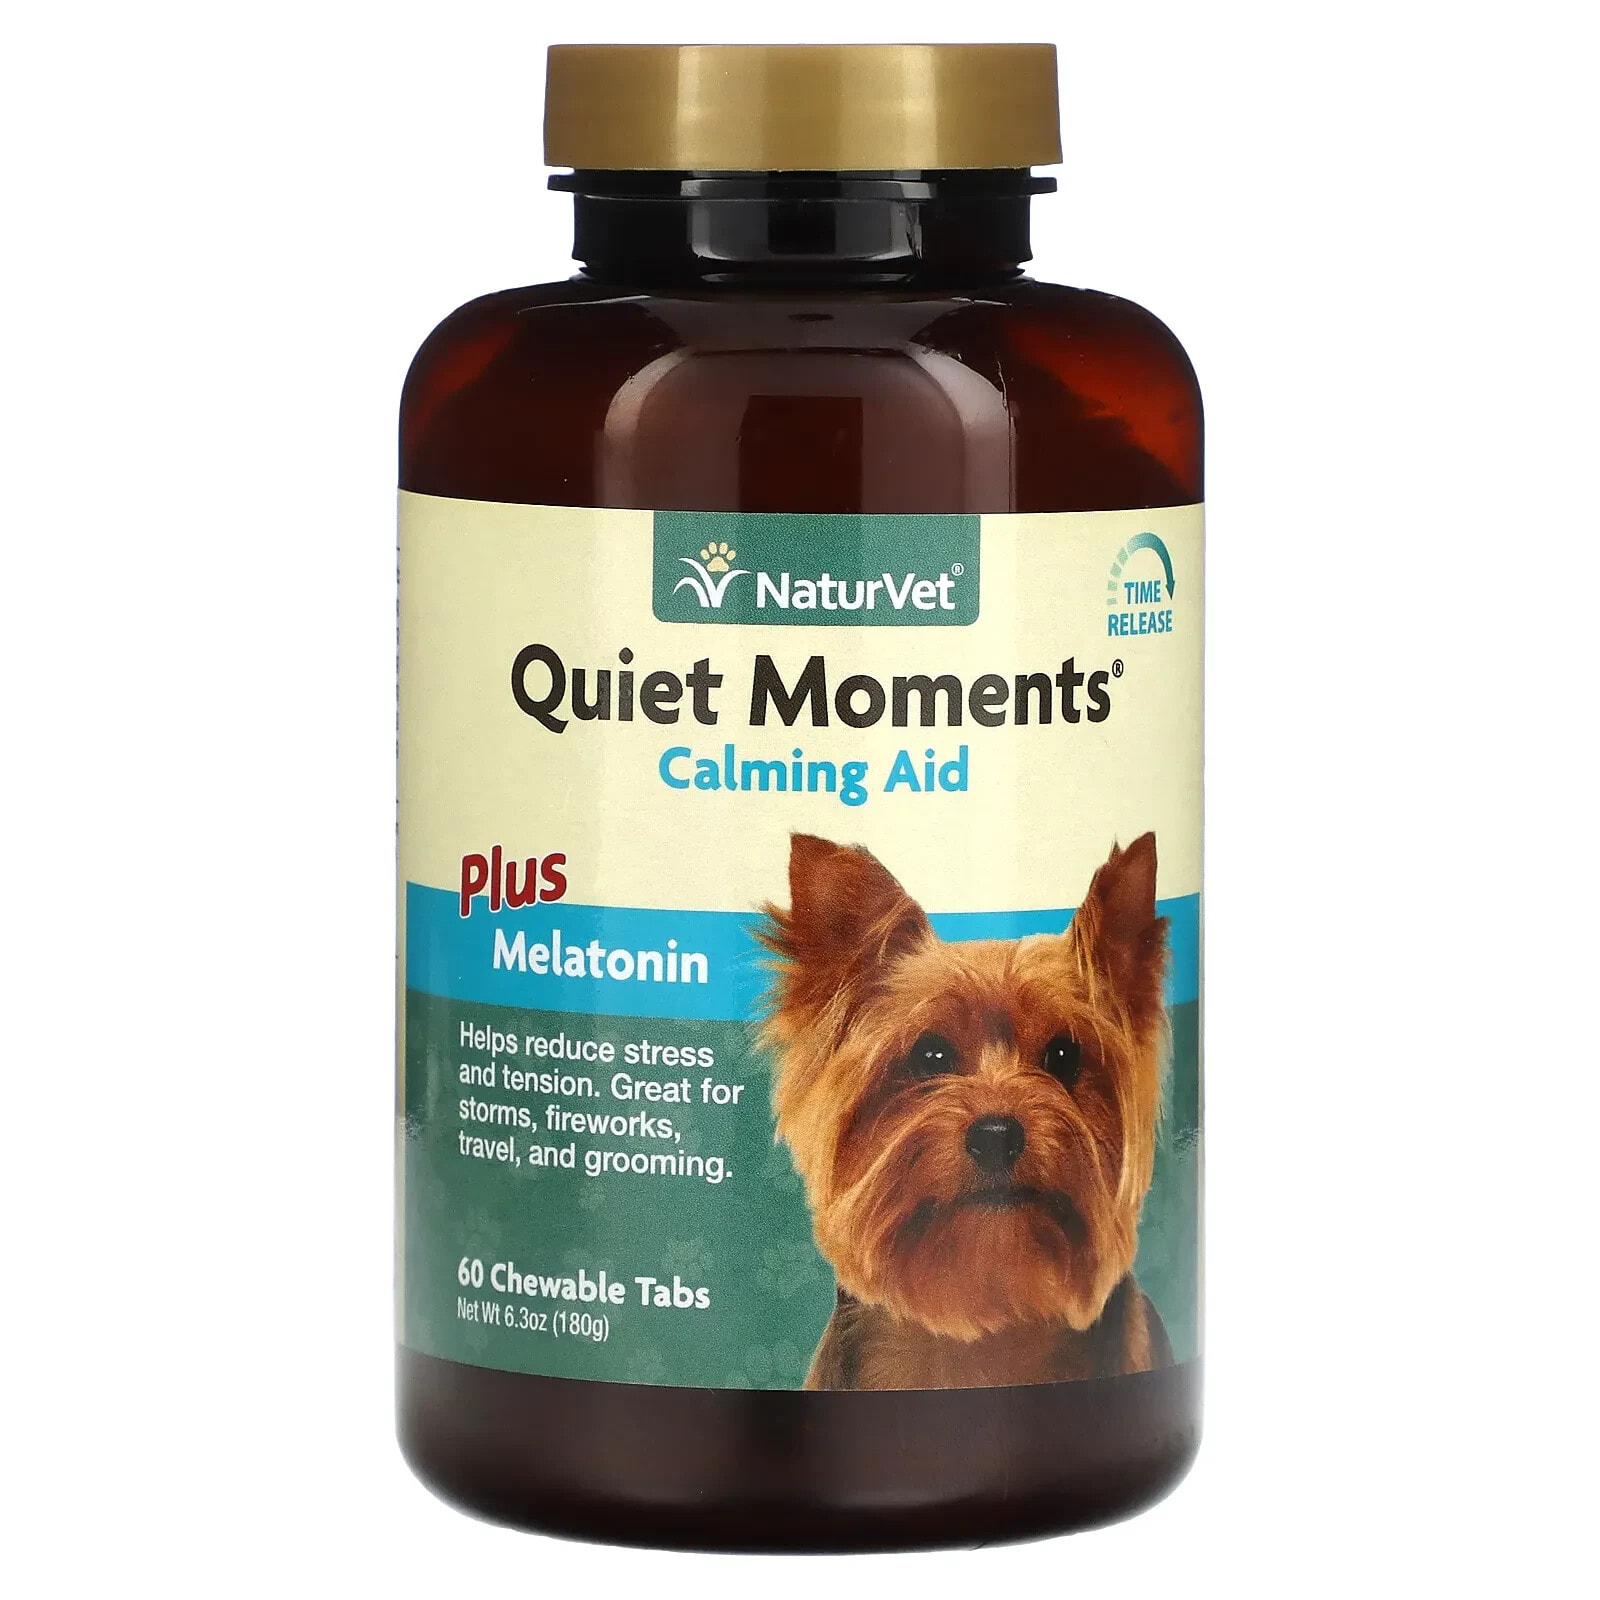 Quiet Moments, Calming Aid Plus Melatonin, For Dogs, 60 Chewable Tabs 6.3 oz (180 g)